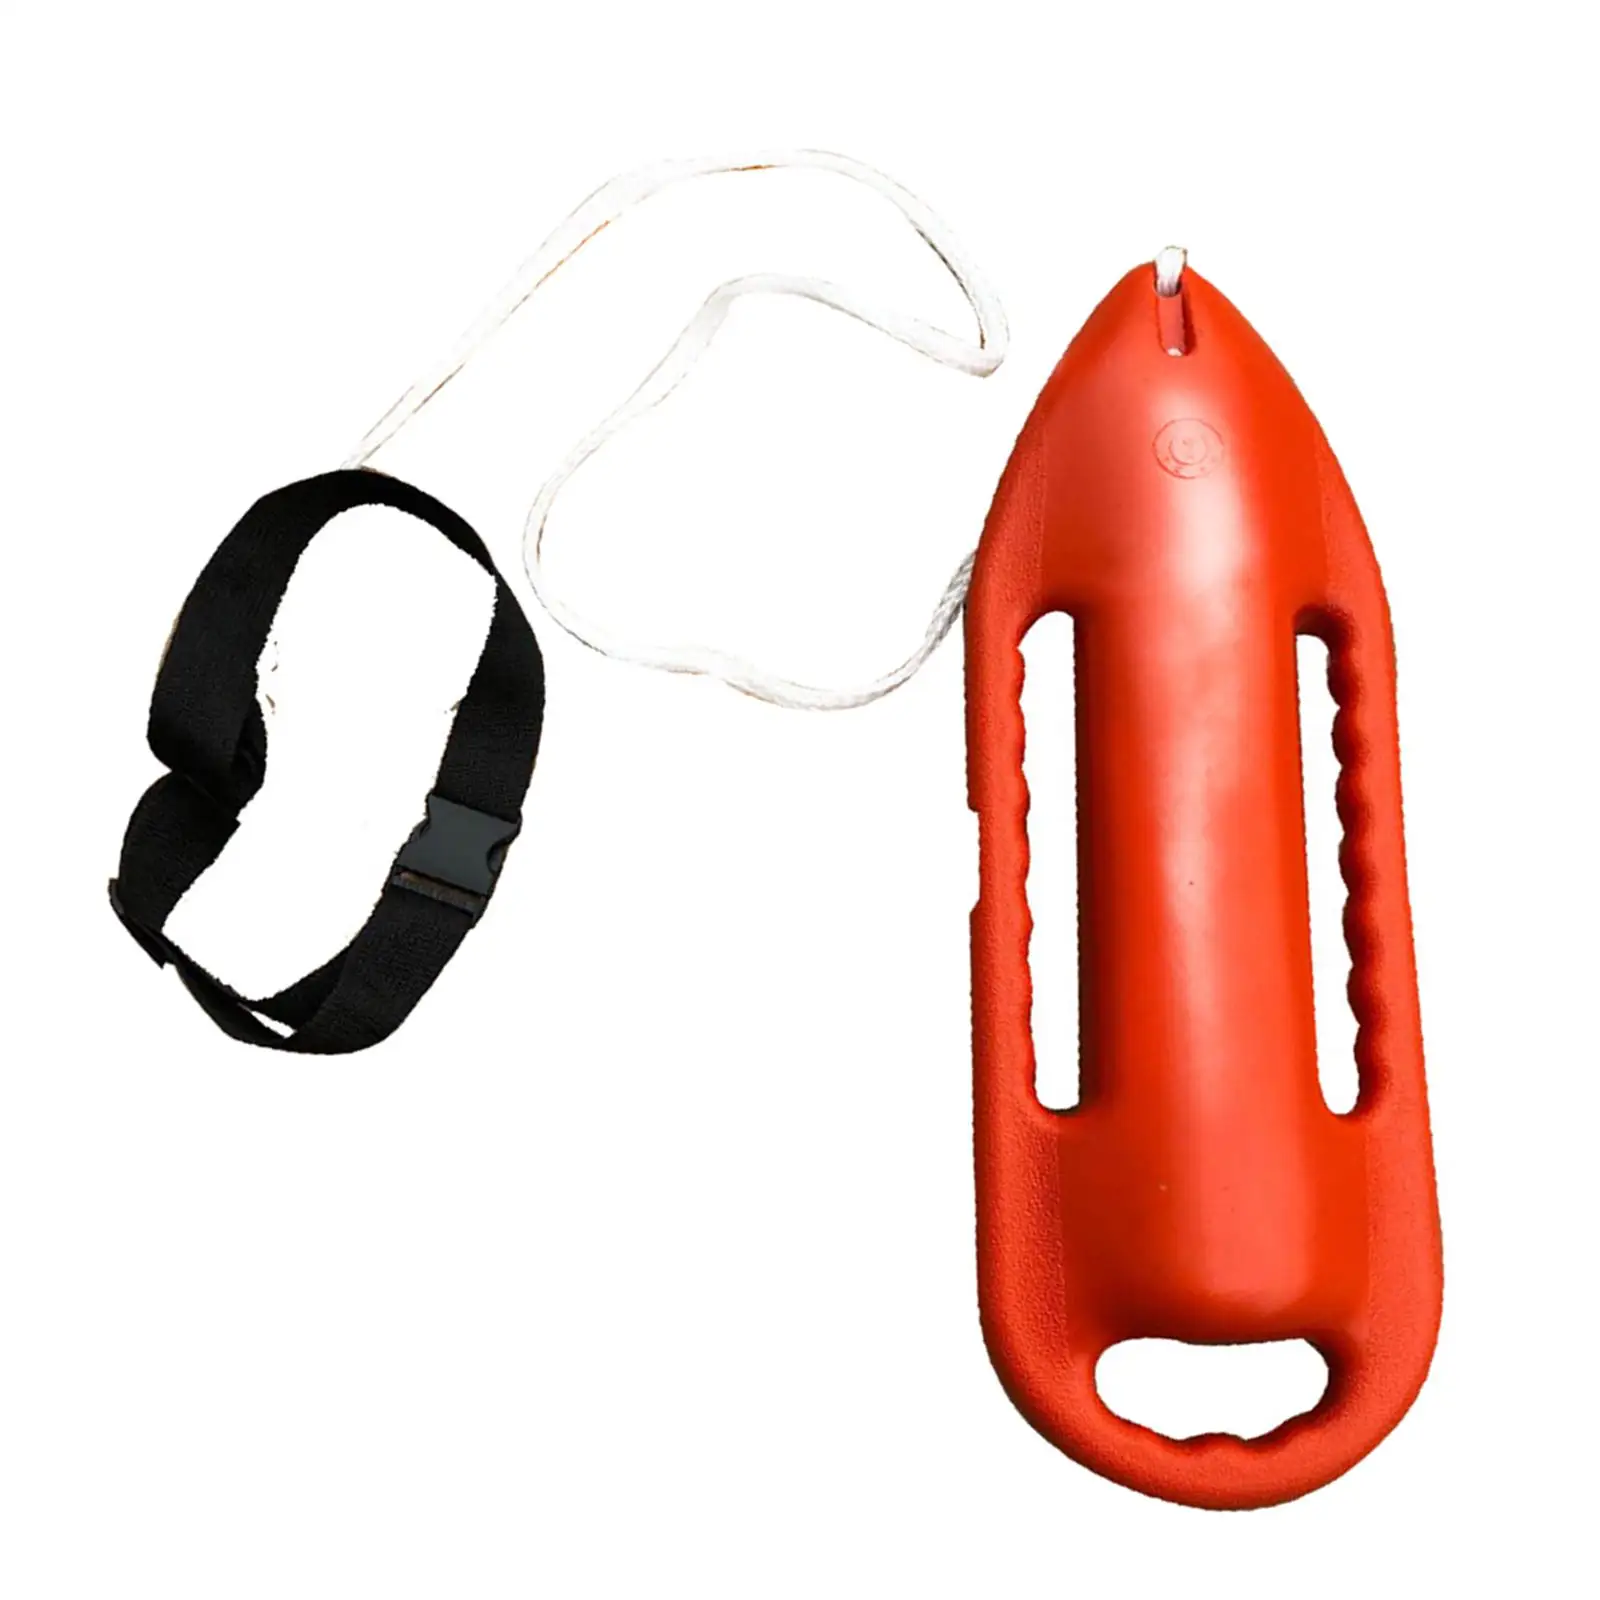 Float Swimming Buoy Lightweight Large Buoyancy Swimming Can for Canoeing, Sailing, Floating Accessories Yachting,